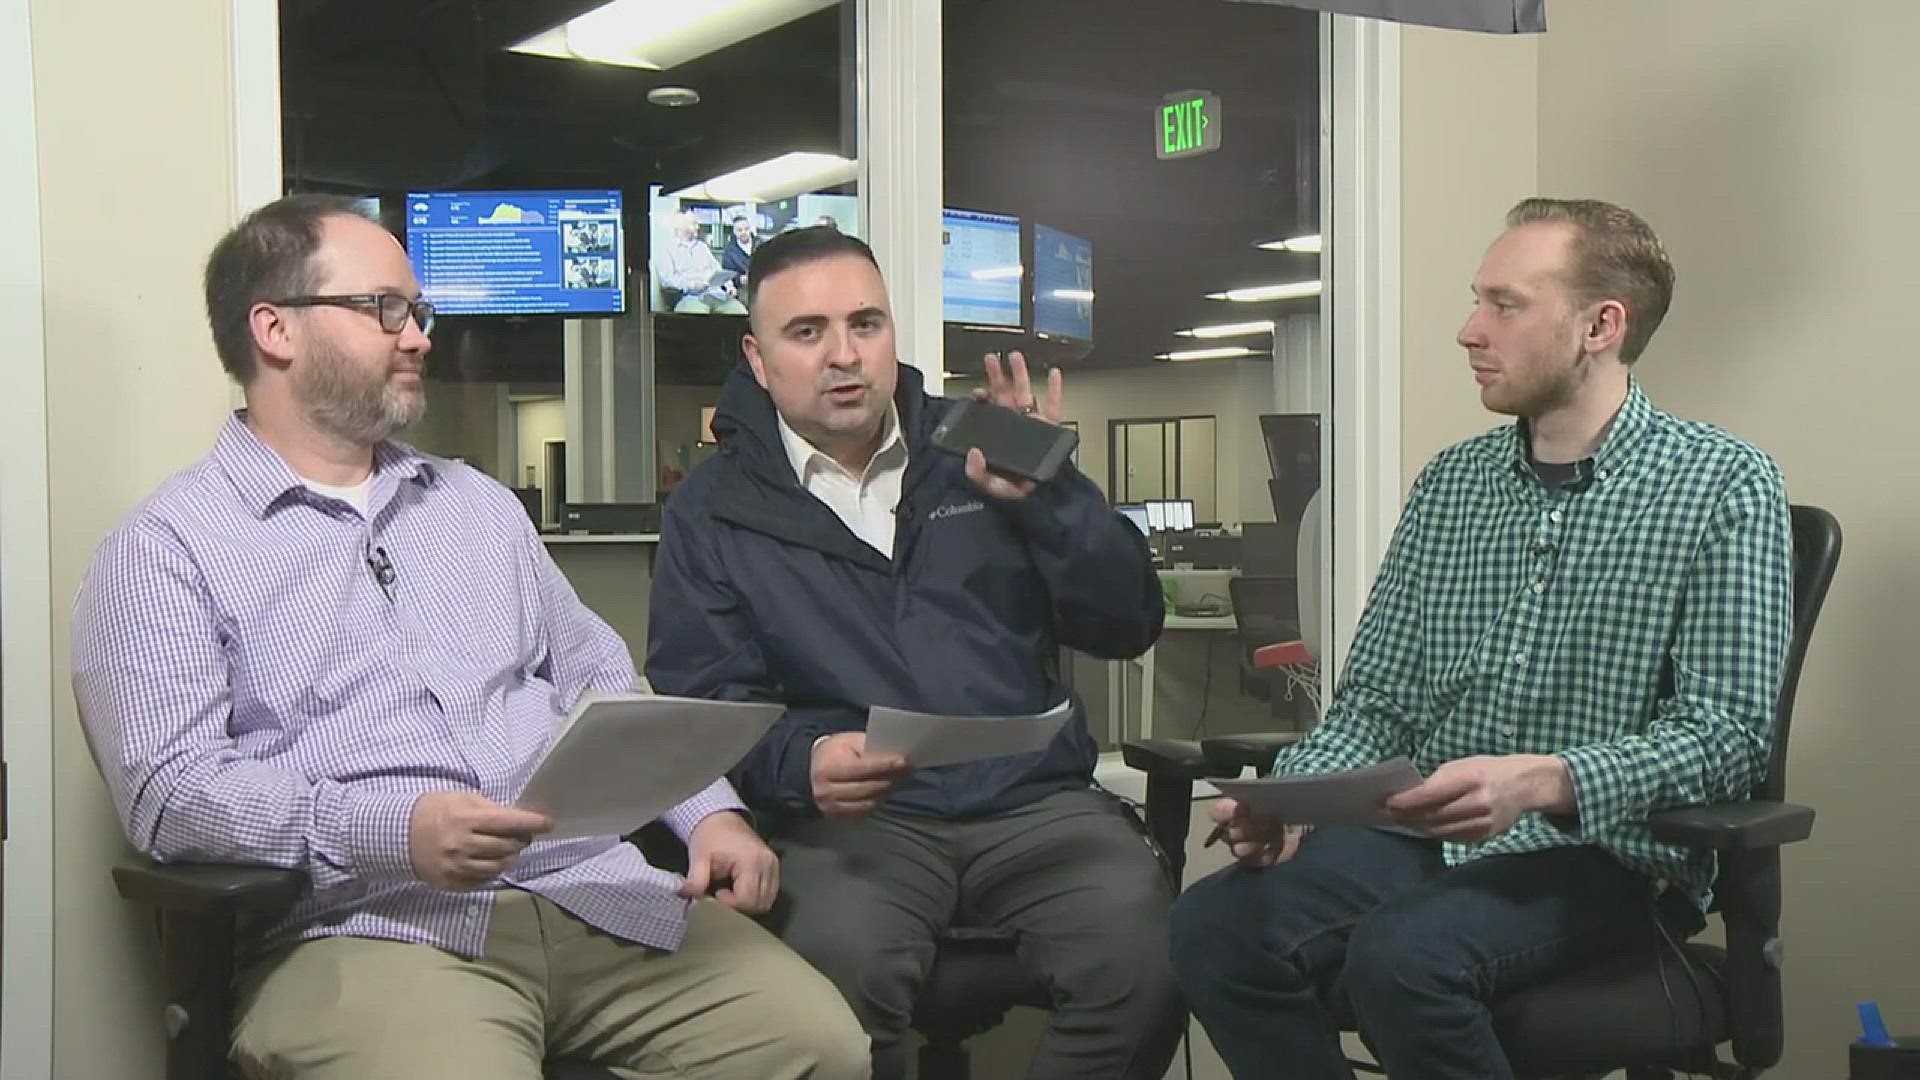 KGW's Jared Cowley, Orlando Sanchez and Nate Hanson debate whether the Blazers, who have the fifth-best record in the NBA, are really the NBA's 5th-best team.